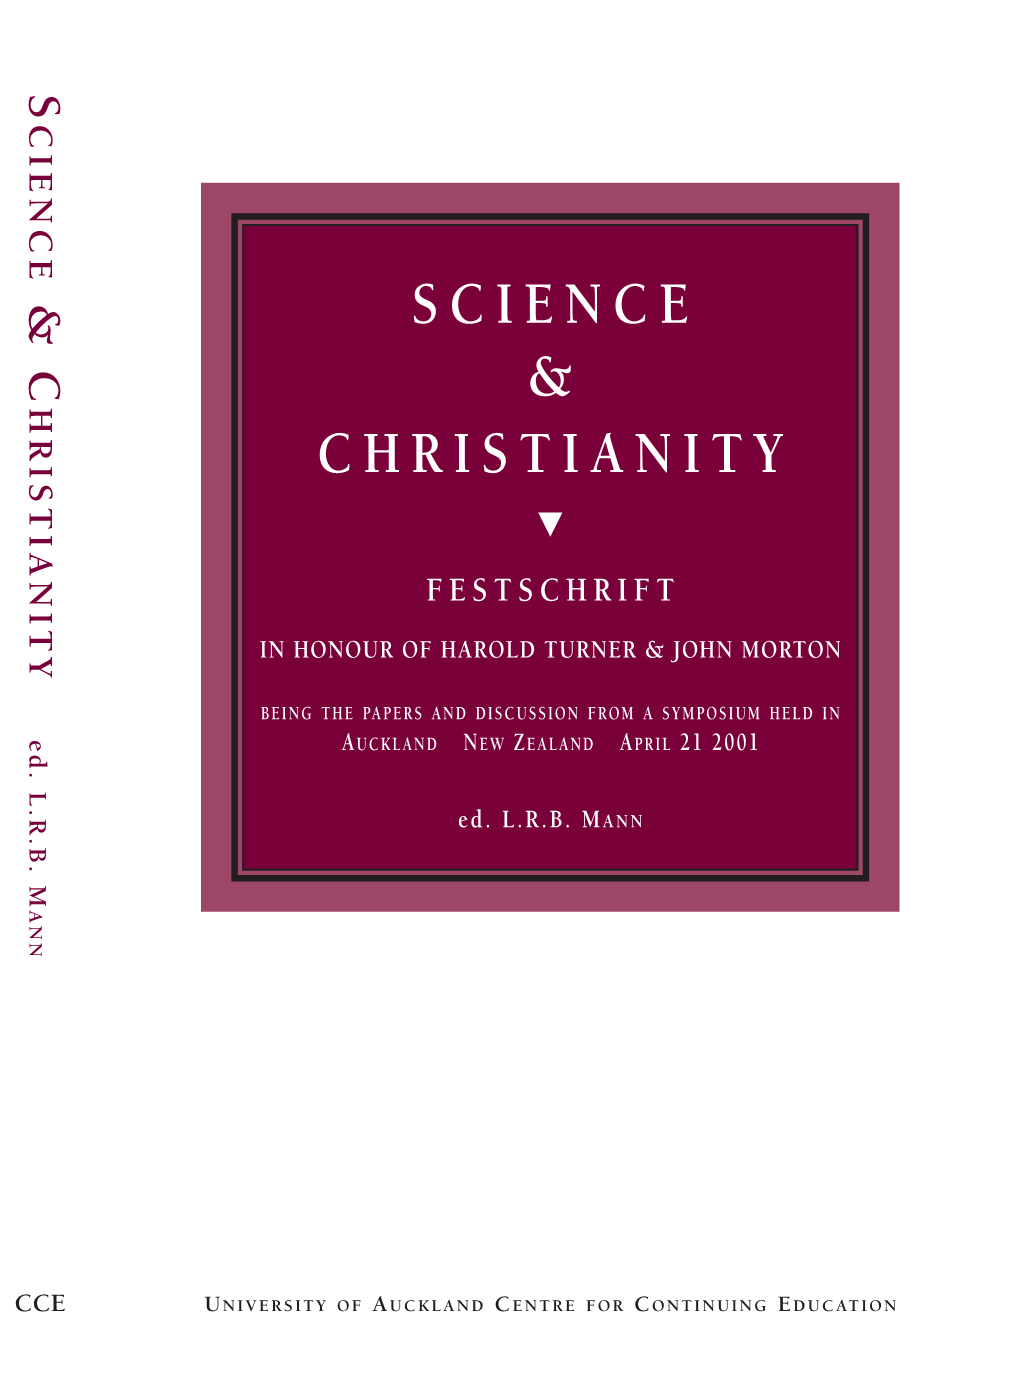 Science & Christianity